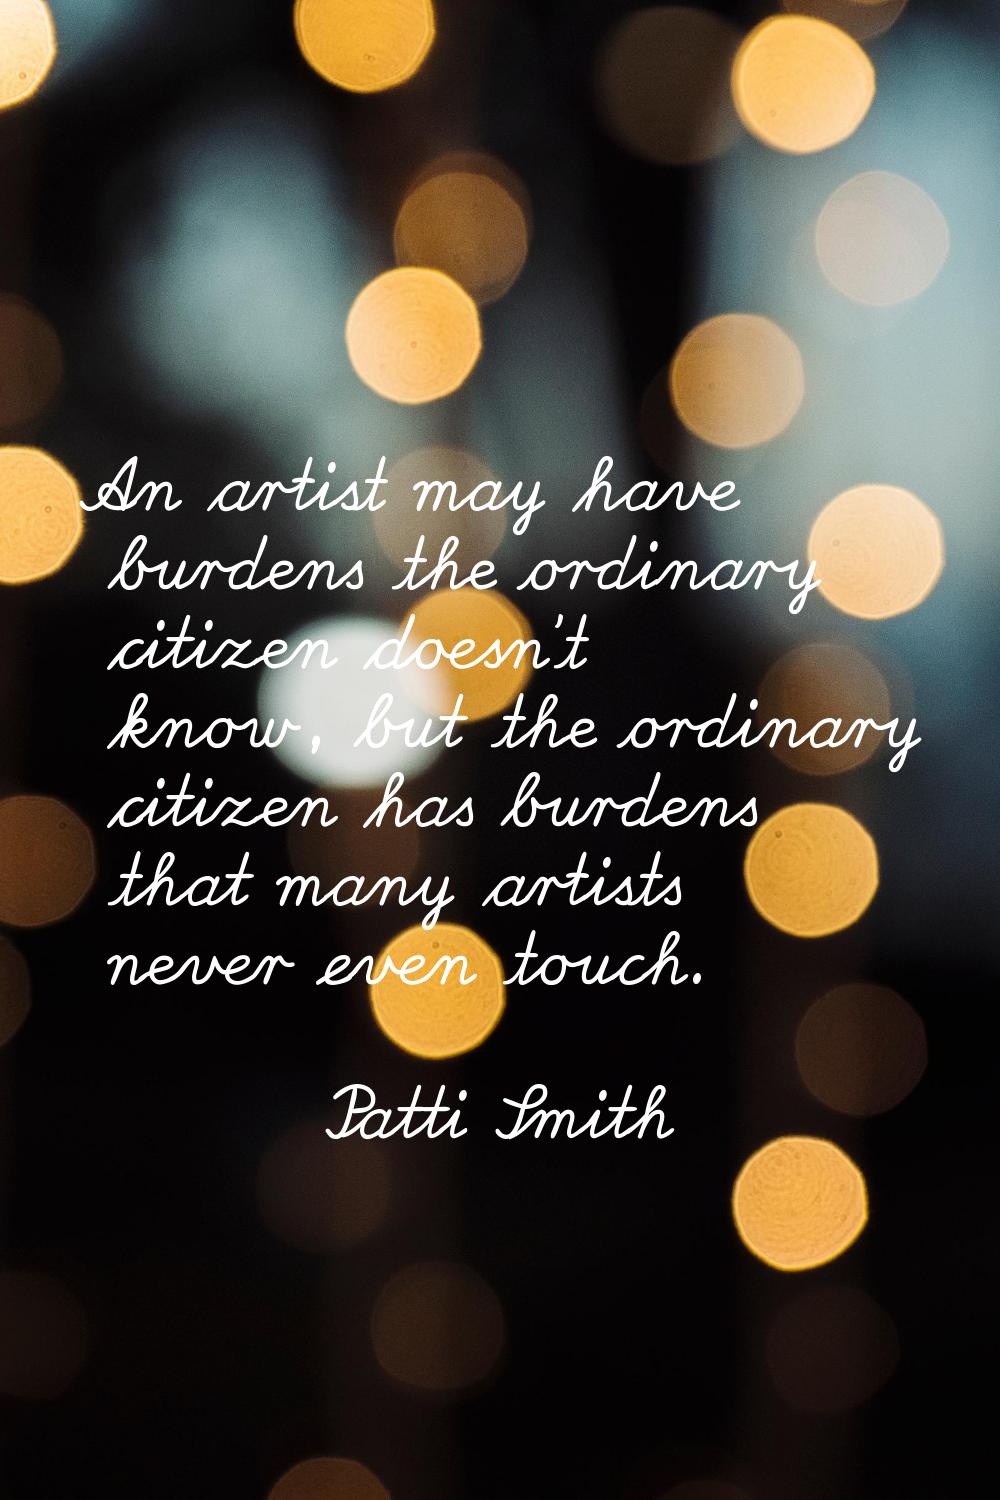 An artist may have burdens the ordinary citizen doesn't know, but the ordinary citizen has burdens 